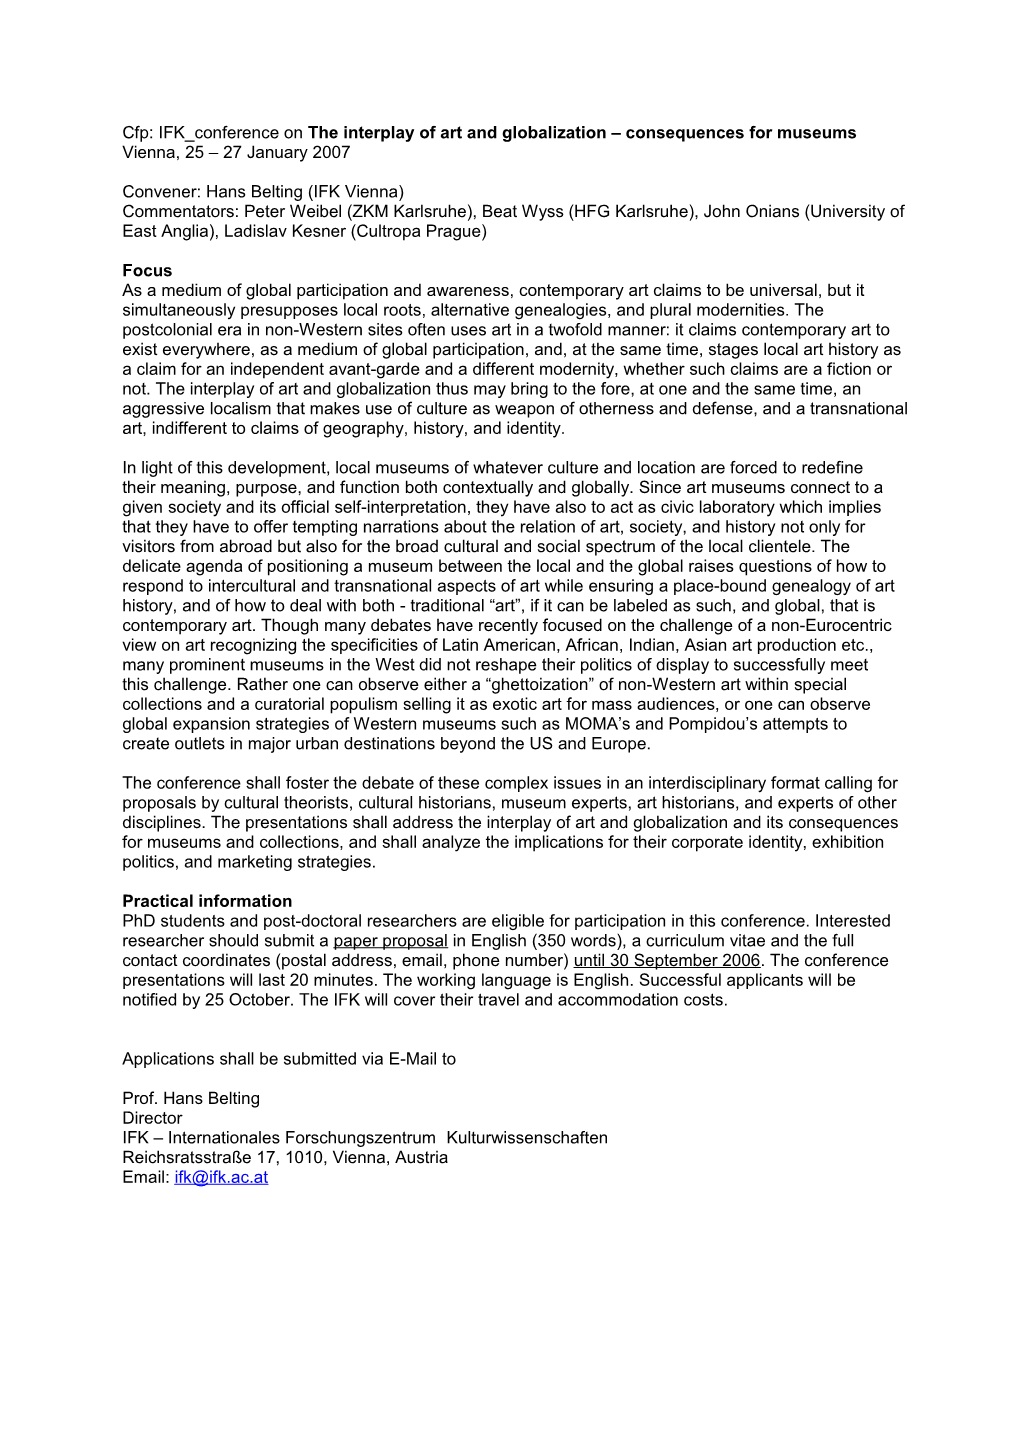 Cfp: IFK Conference on the Interplay of Art and Globalization Consequences for Museums